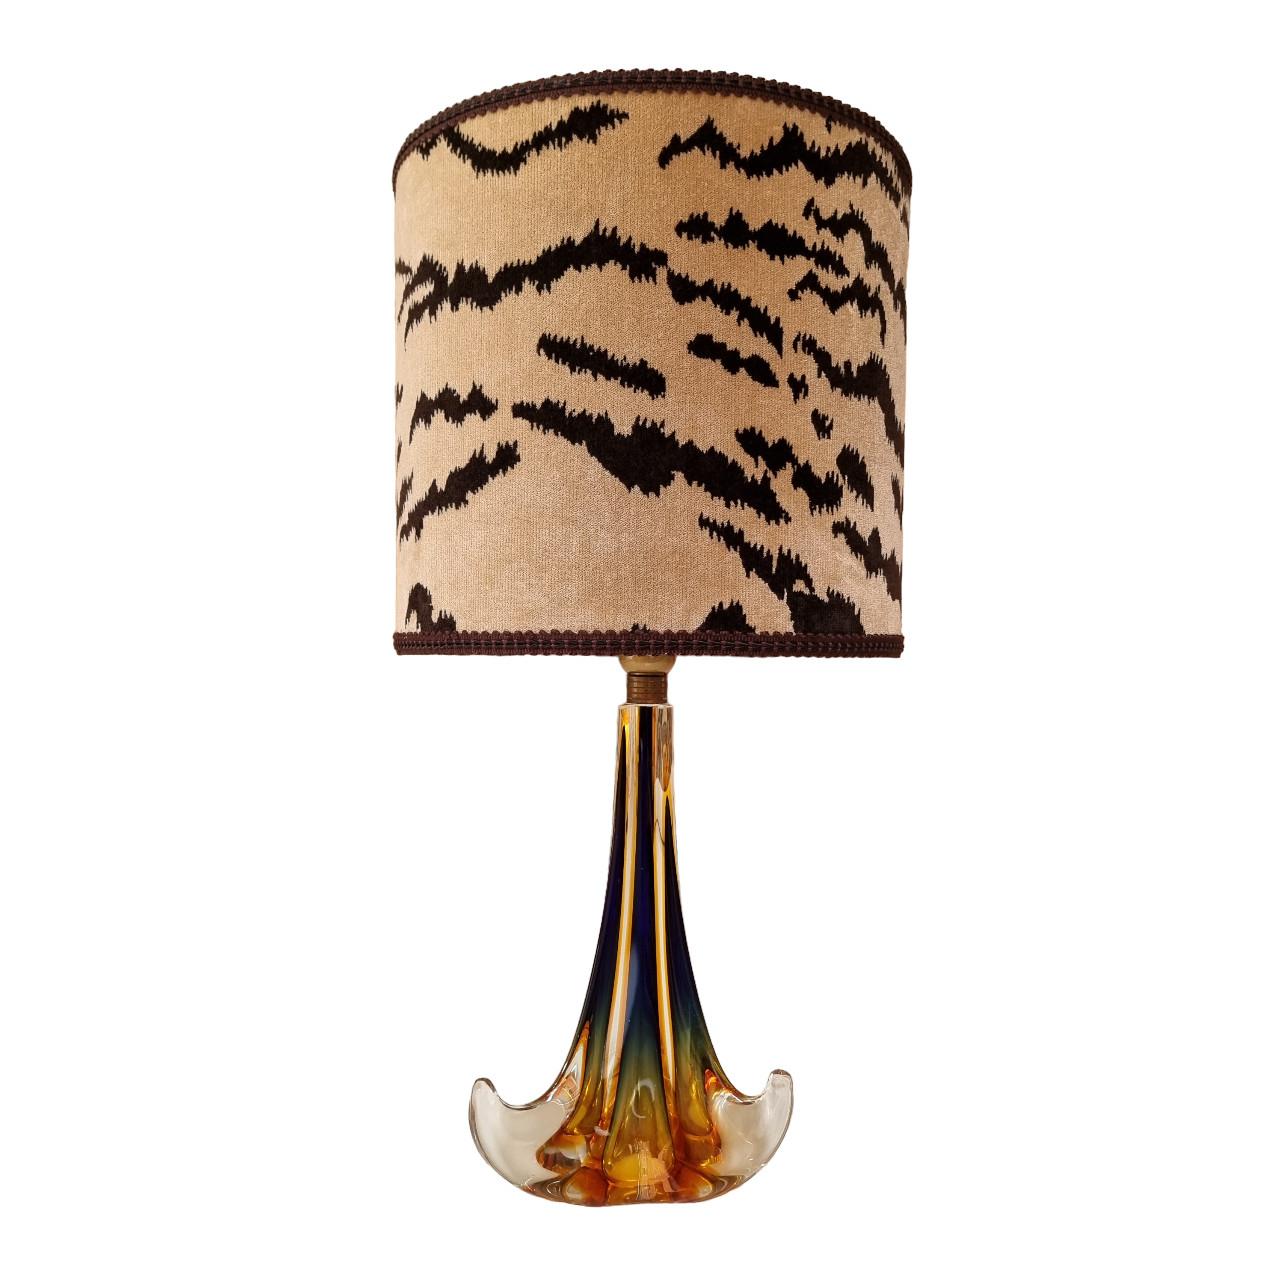 This is an amazing Murano amber glass table lamp, mid-20th century. Newly wired and in perfect working condition.
The drum lampshade is new handmade using Luigi Bevilacqua velvet - Tigre pattern - in sand and dark brown color, finished with brown